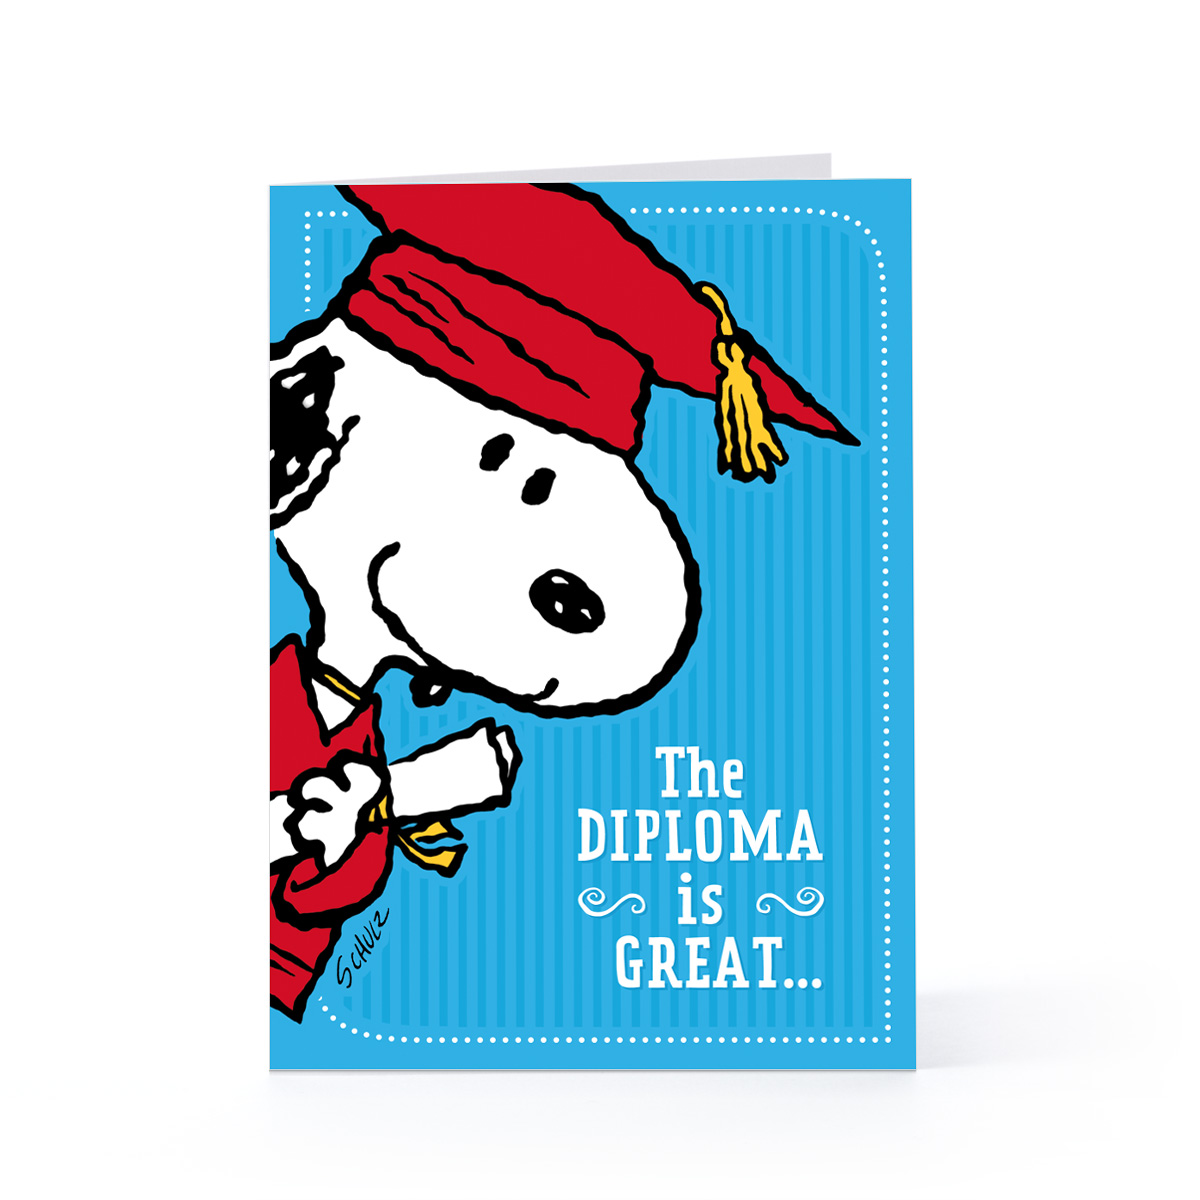 Cool Graduation Greeting Card Design Idea With Funny Snoopy ...